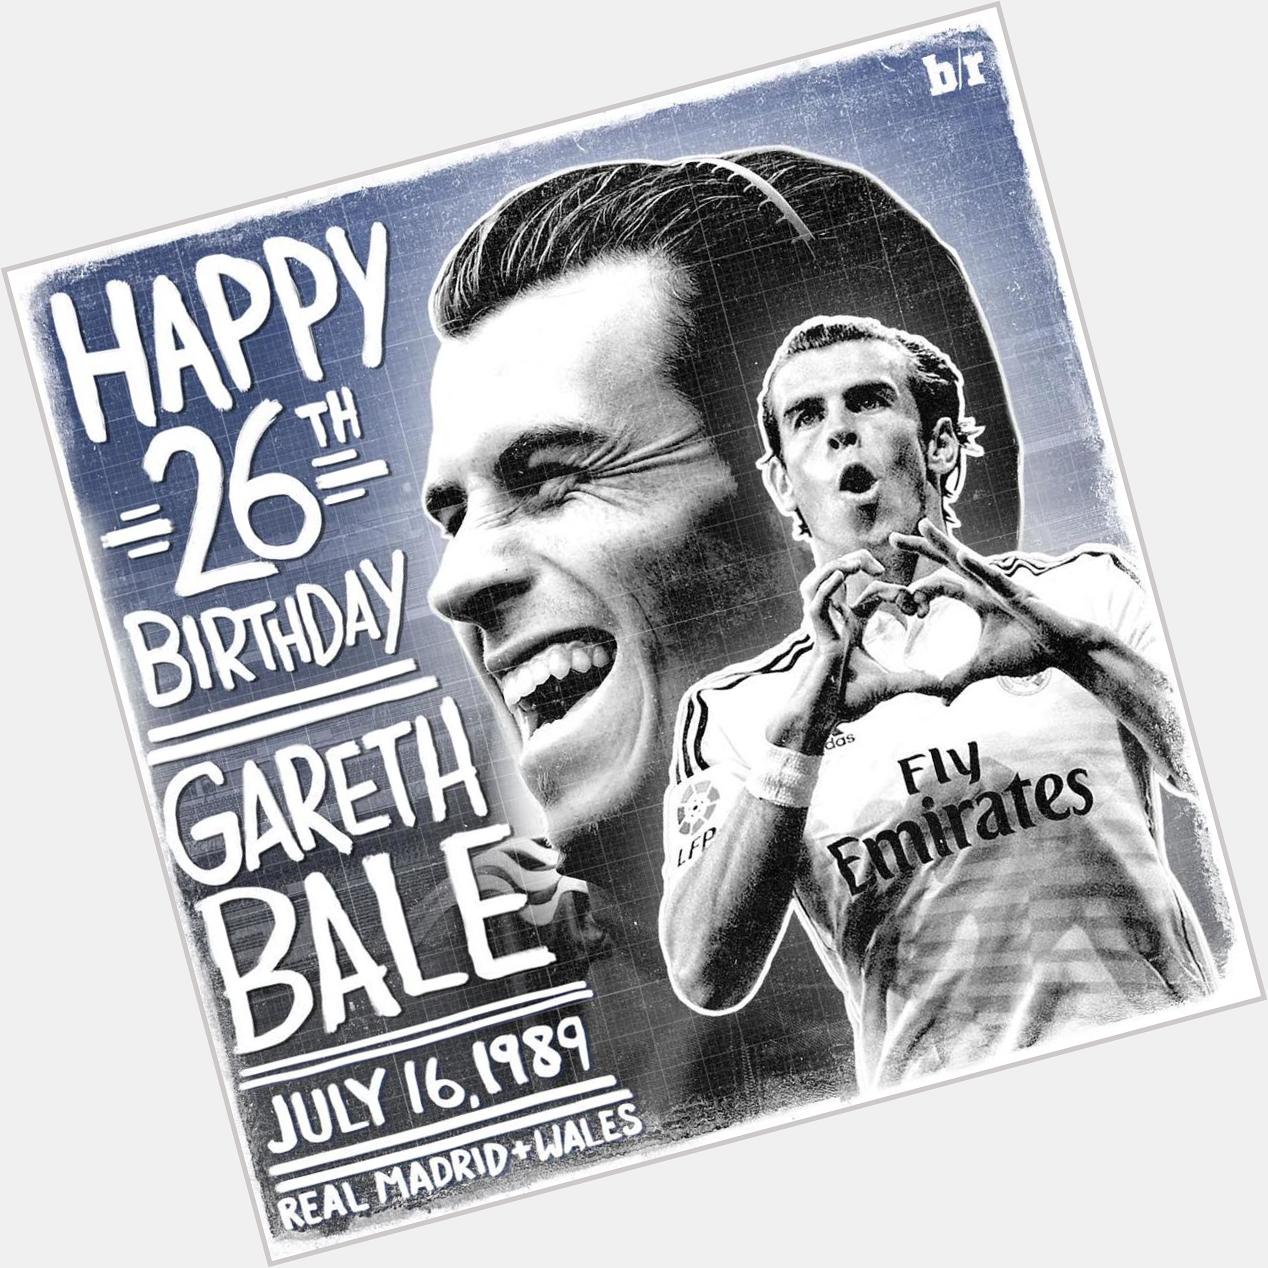 Happy Birthday Gareth Bale                          my wish to be a year full of sucess        